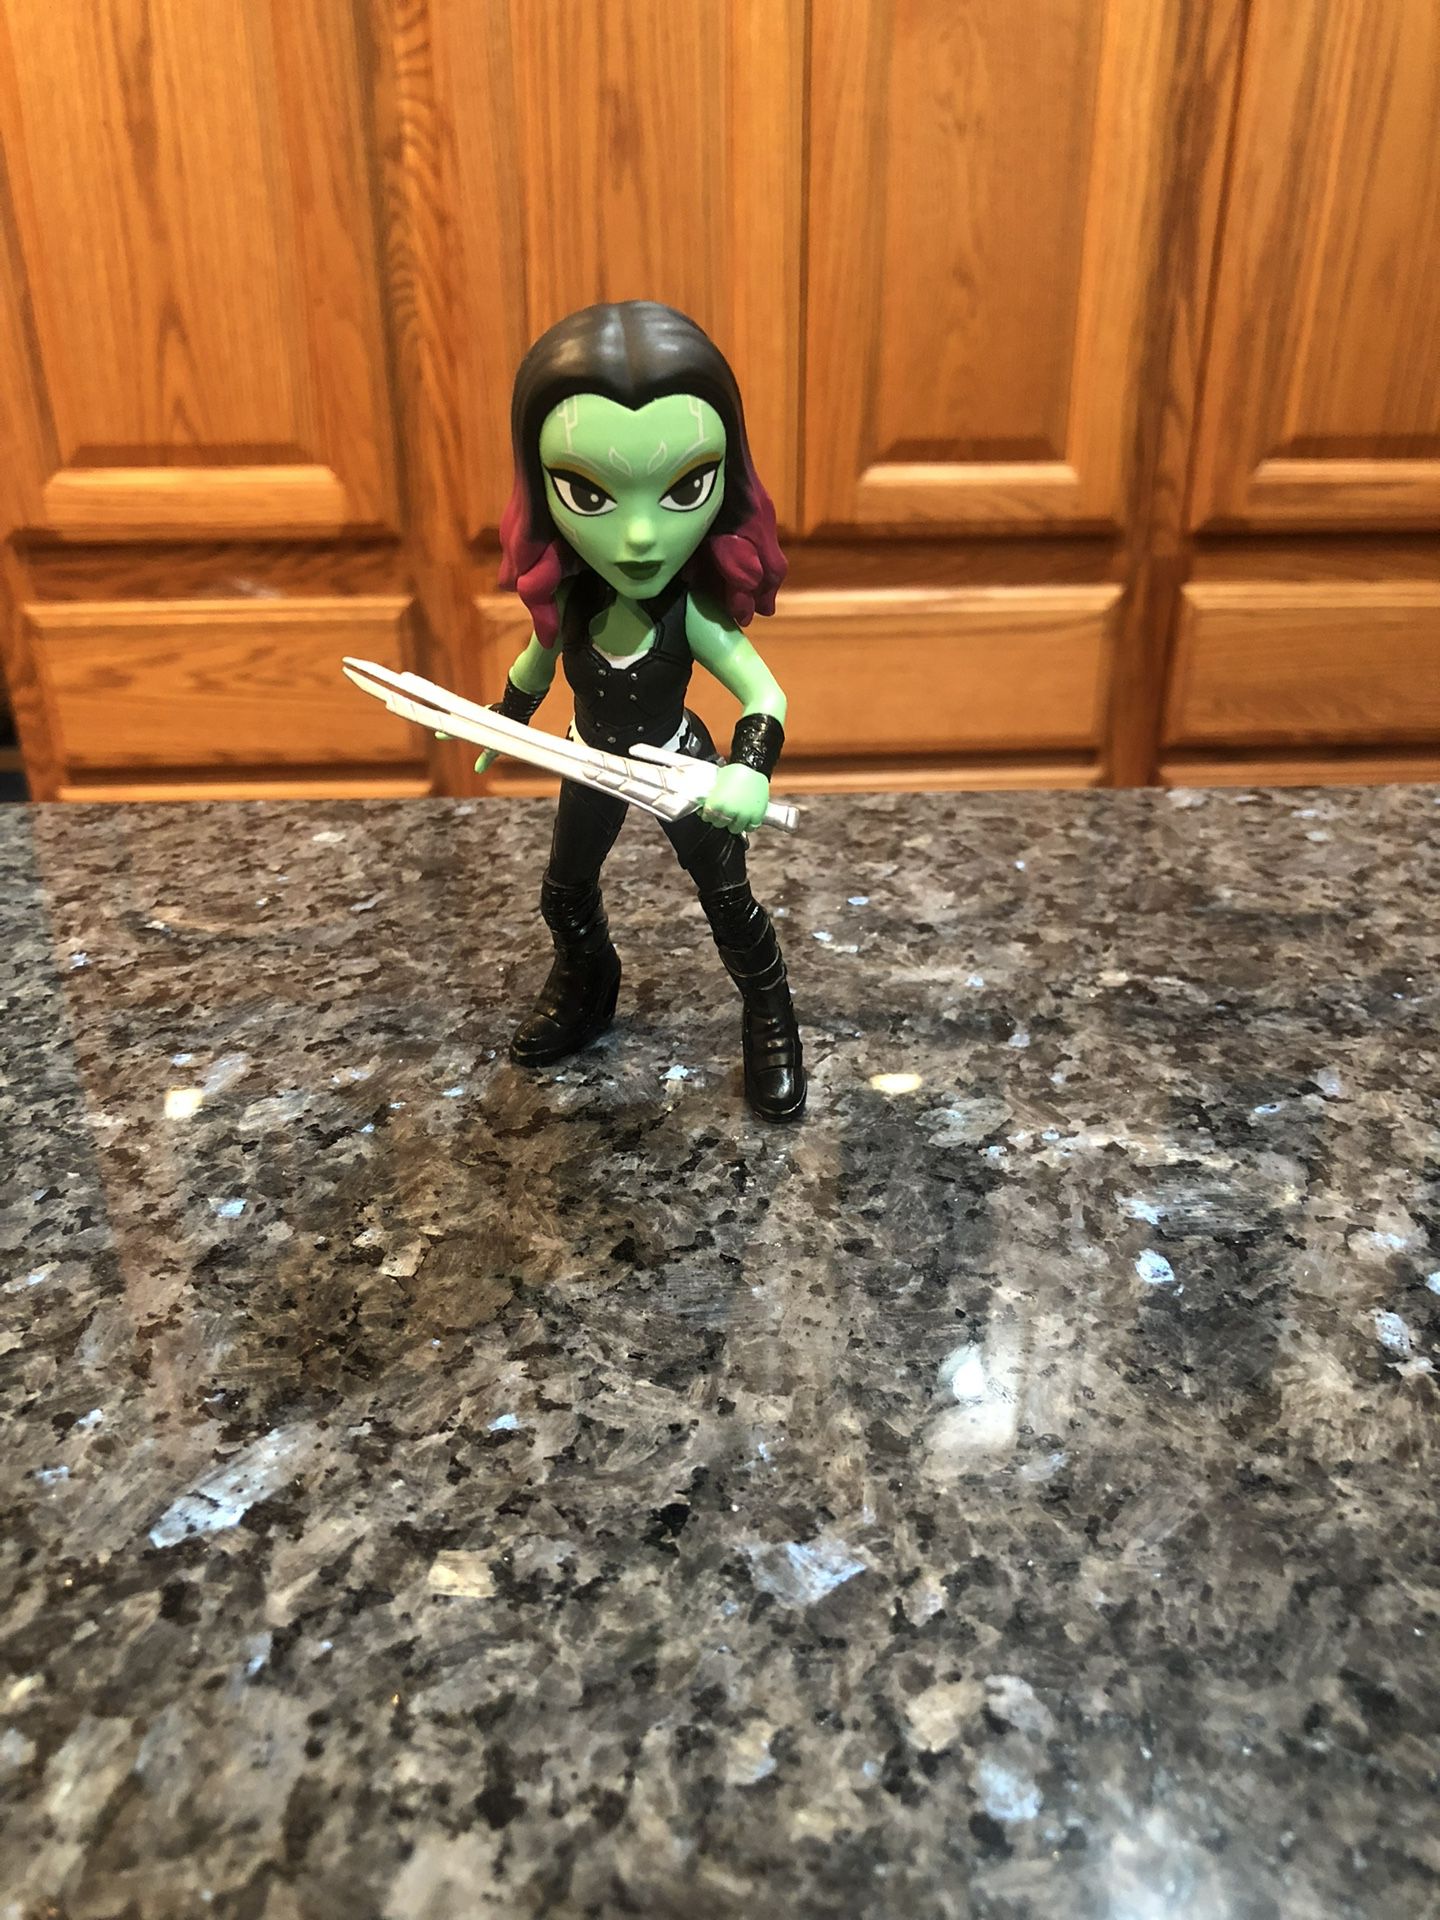 Funko Rock Candy Guardians Of The Galaxy Gamora Toy Figure.  Size 5 inches Tall .  Brand New Has Been On Display In A Cabinet .  No Box 